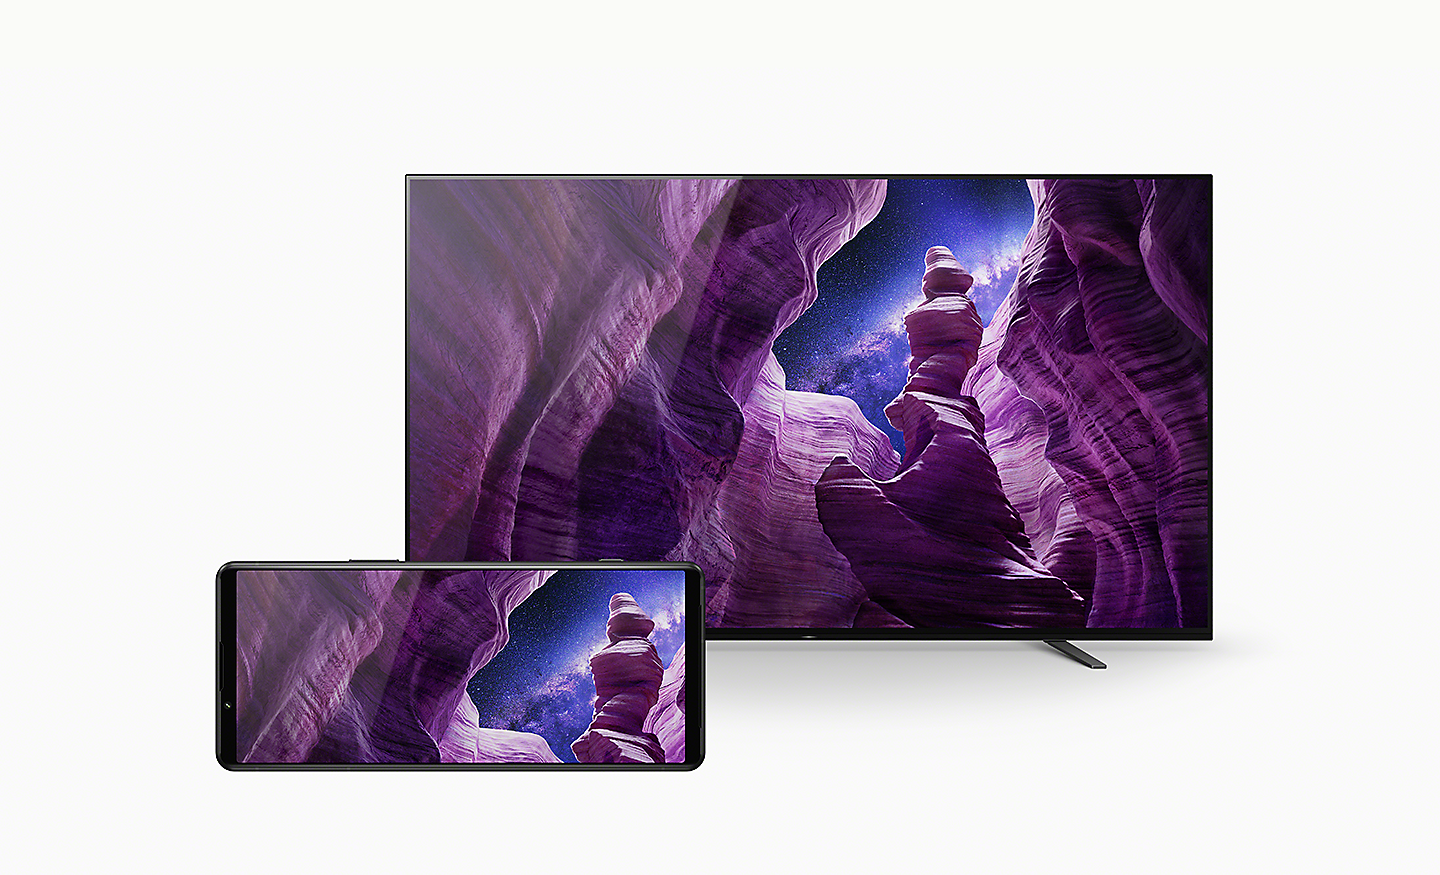 An Xperia 5 IV and a BRAVIA TV - both screens display the same image of dramatic rock formations